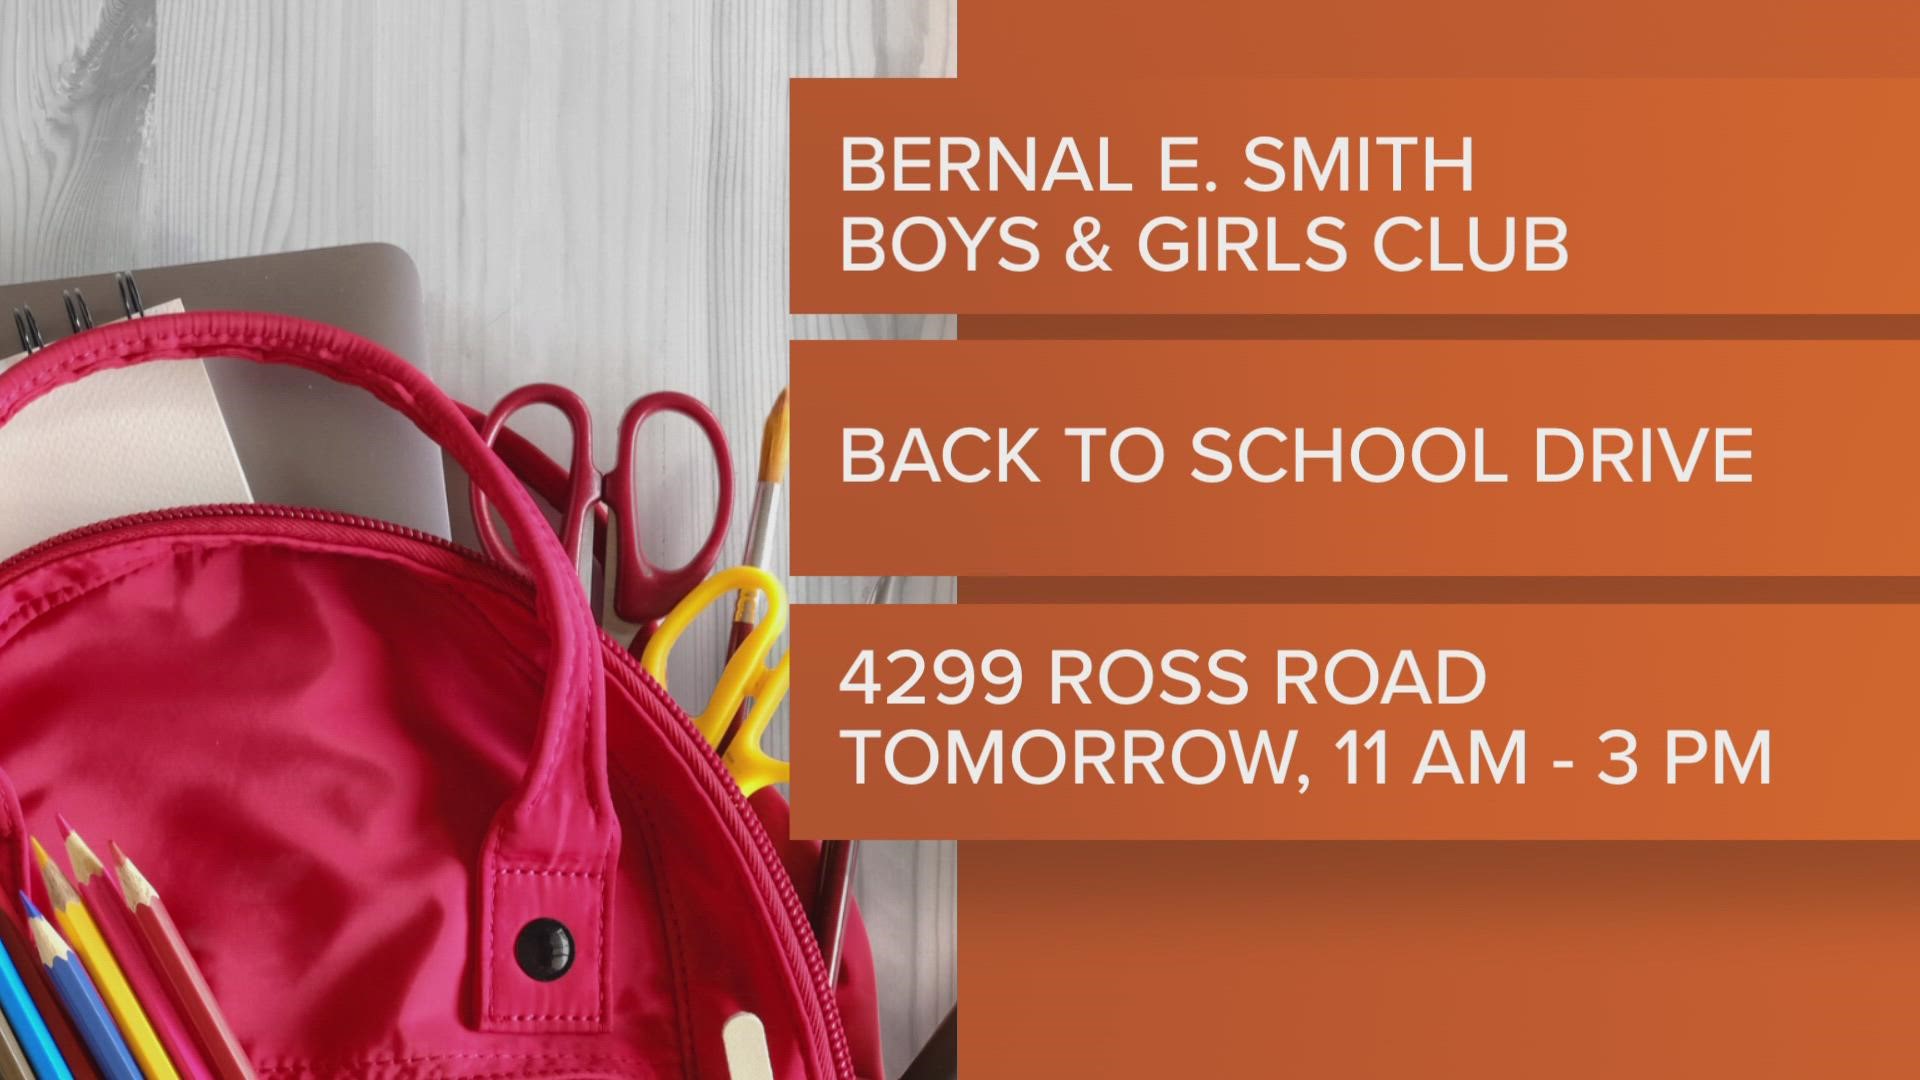 Free haircuts for boys as well as facials and manicures for the girls will be at 4299 Moss Road at the Bernal E. Smith Boys & Girls club.